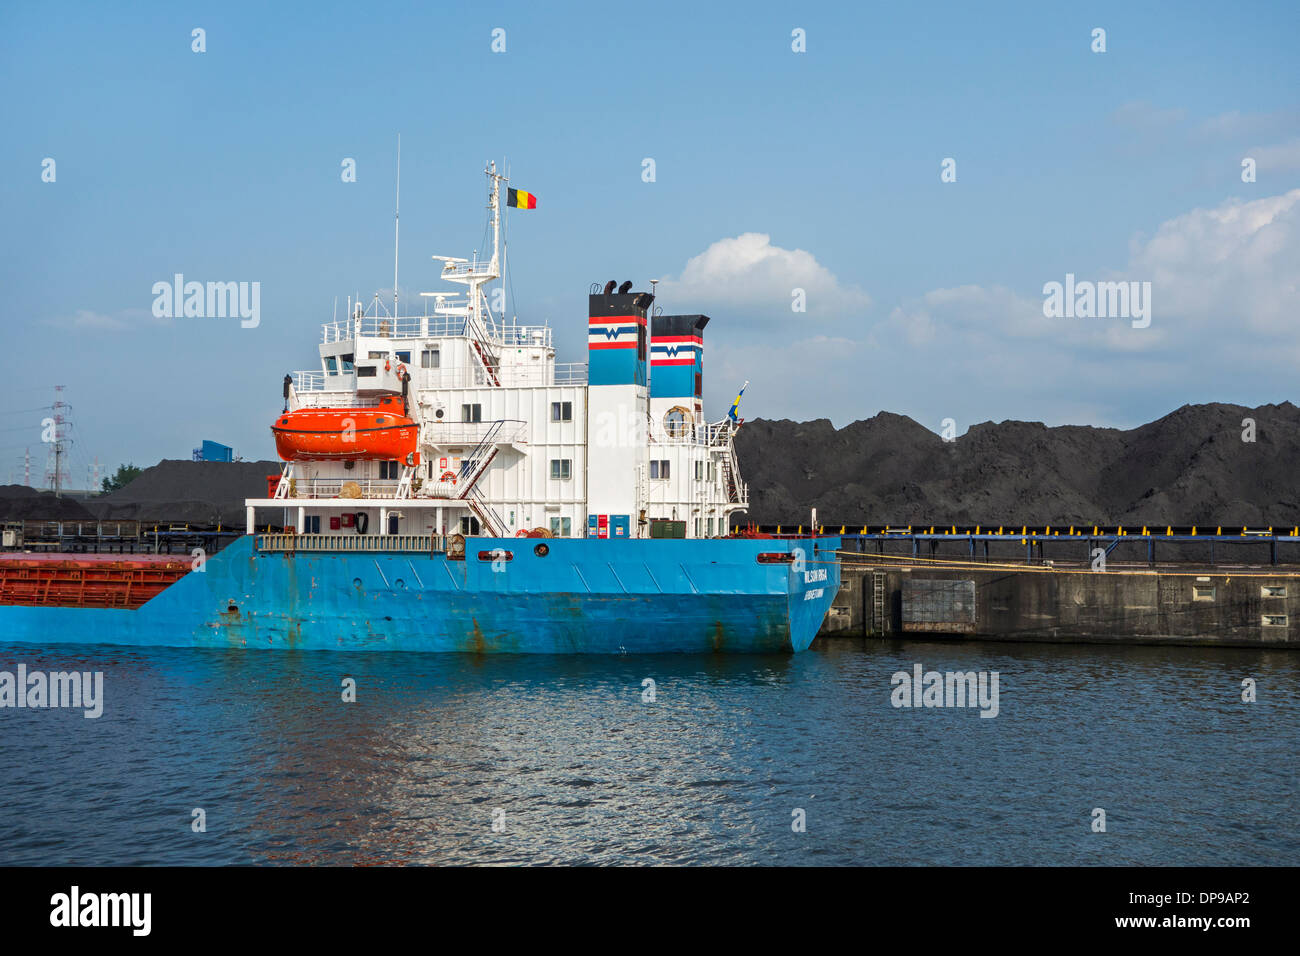 Bulk carrier docked in front of heaps of coal at SEA-invest / Ghent Coal Terminal / GCT, port of Ghent, East Flanders, Belgium Stock Photo